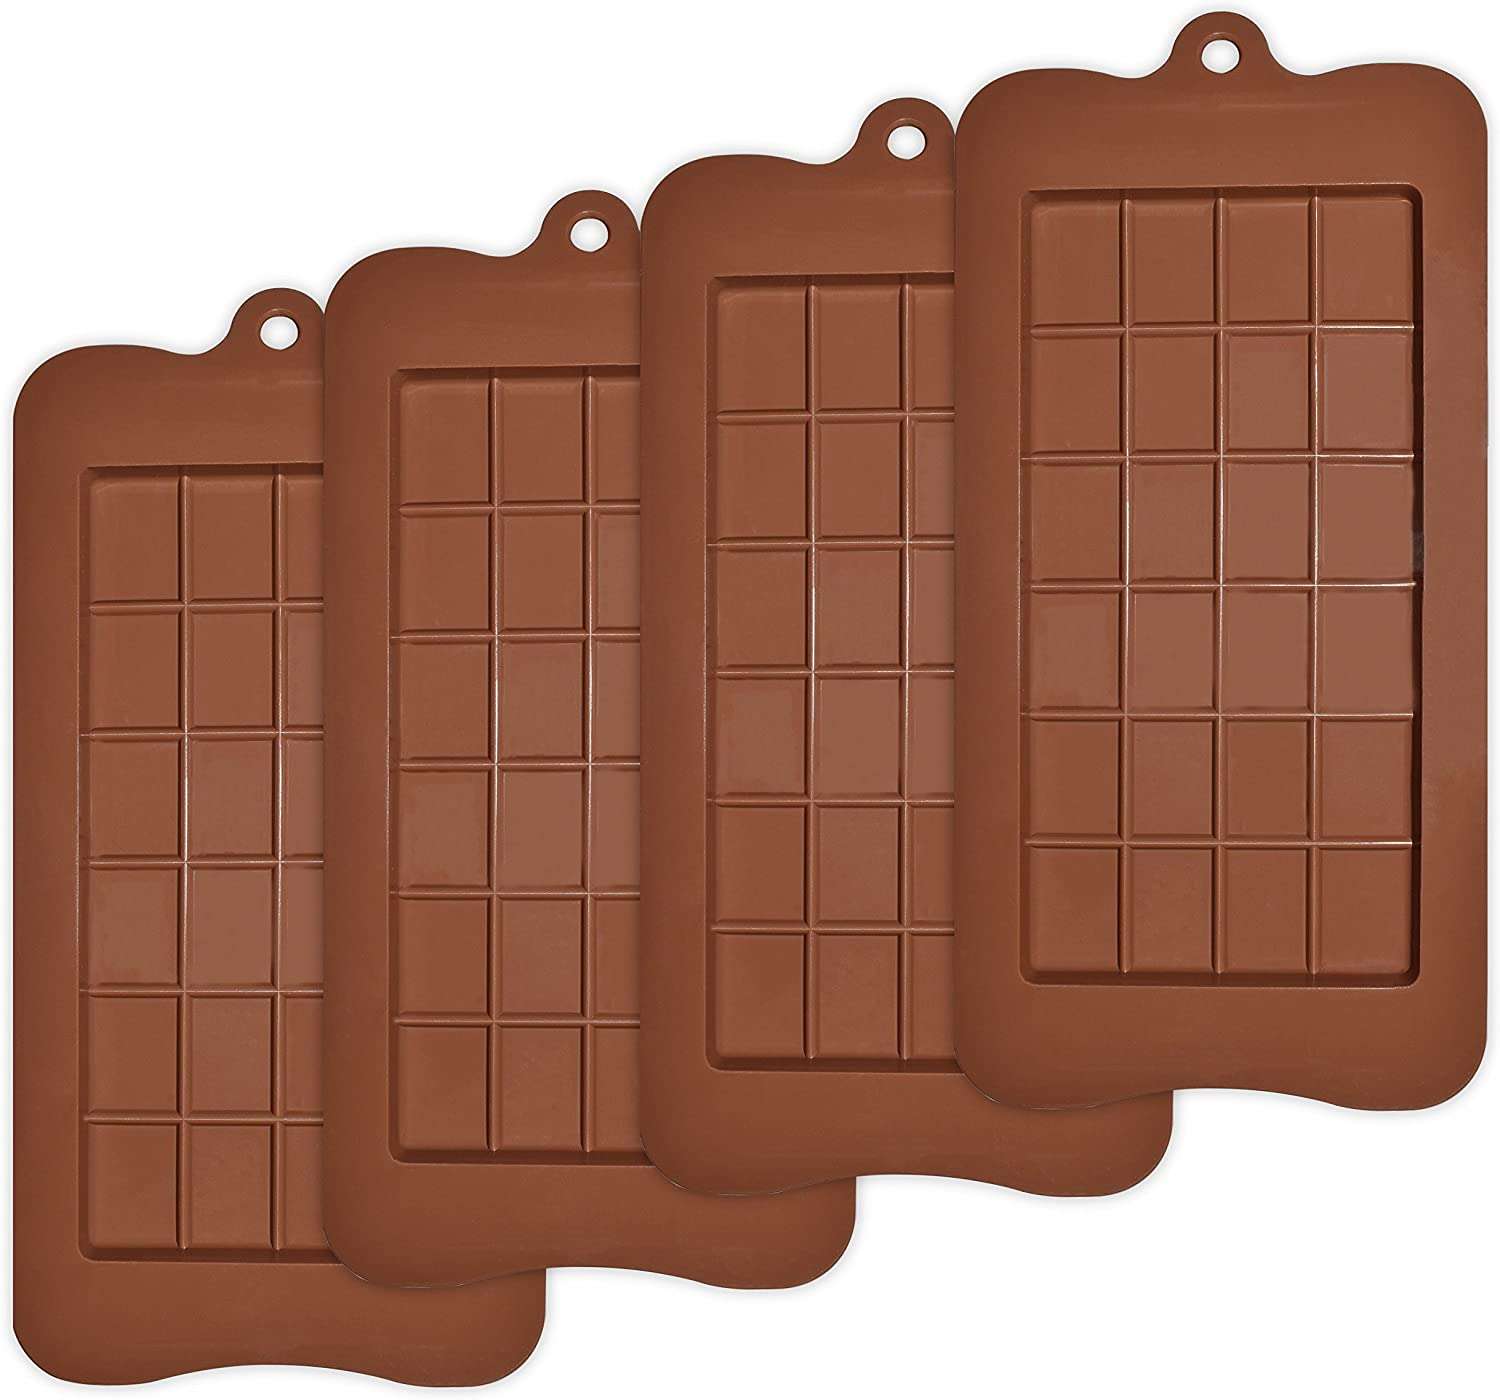 10. HomEdge Candy & Chocolate Mold